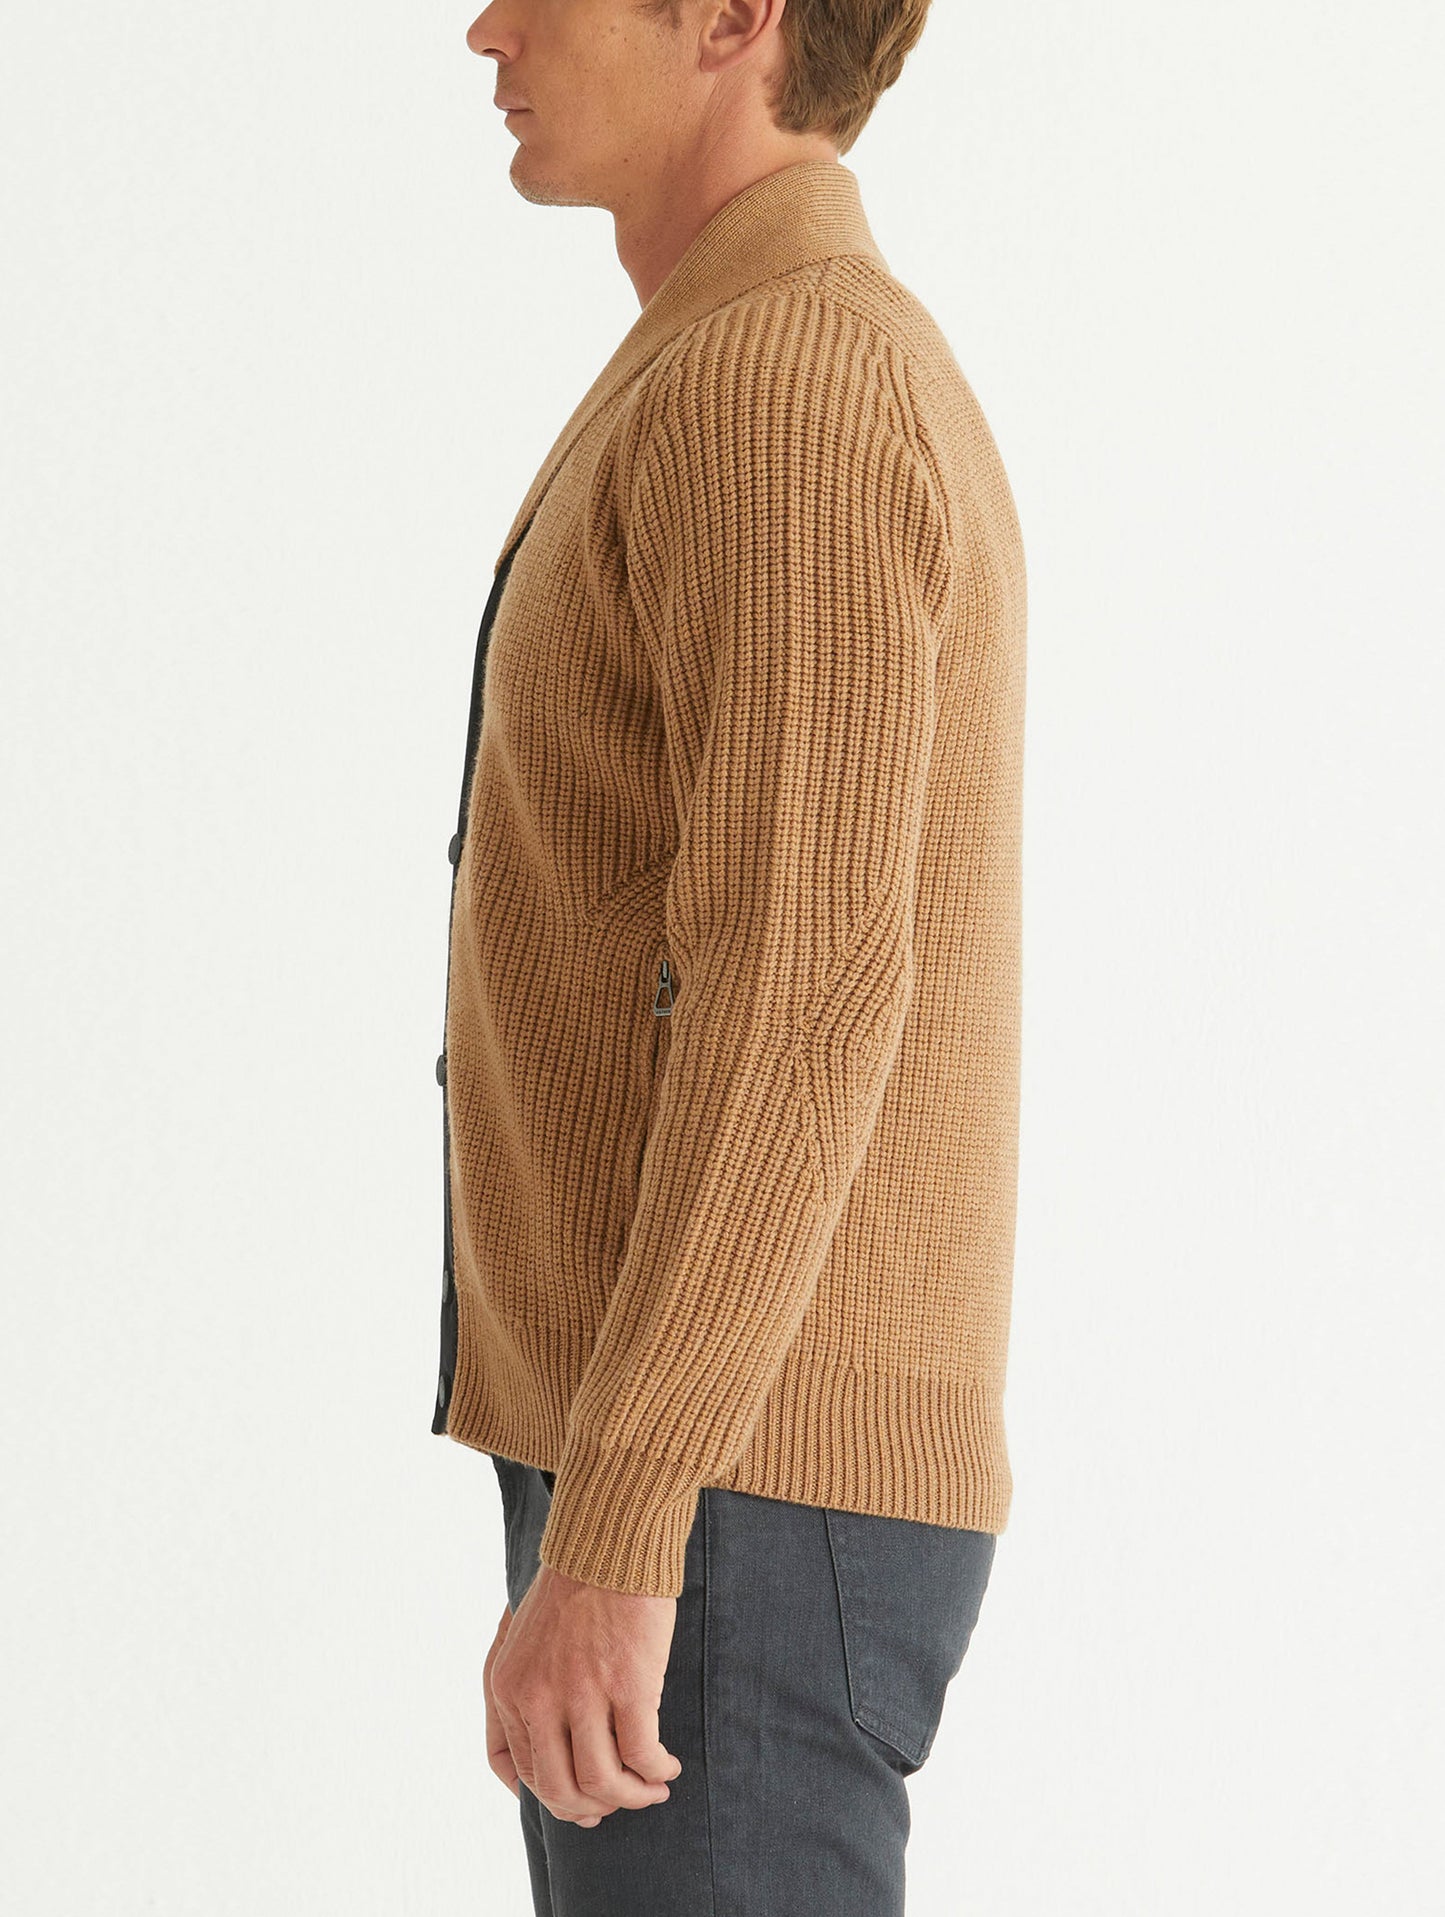 cardigan for men from Aether Apparel